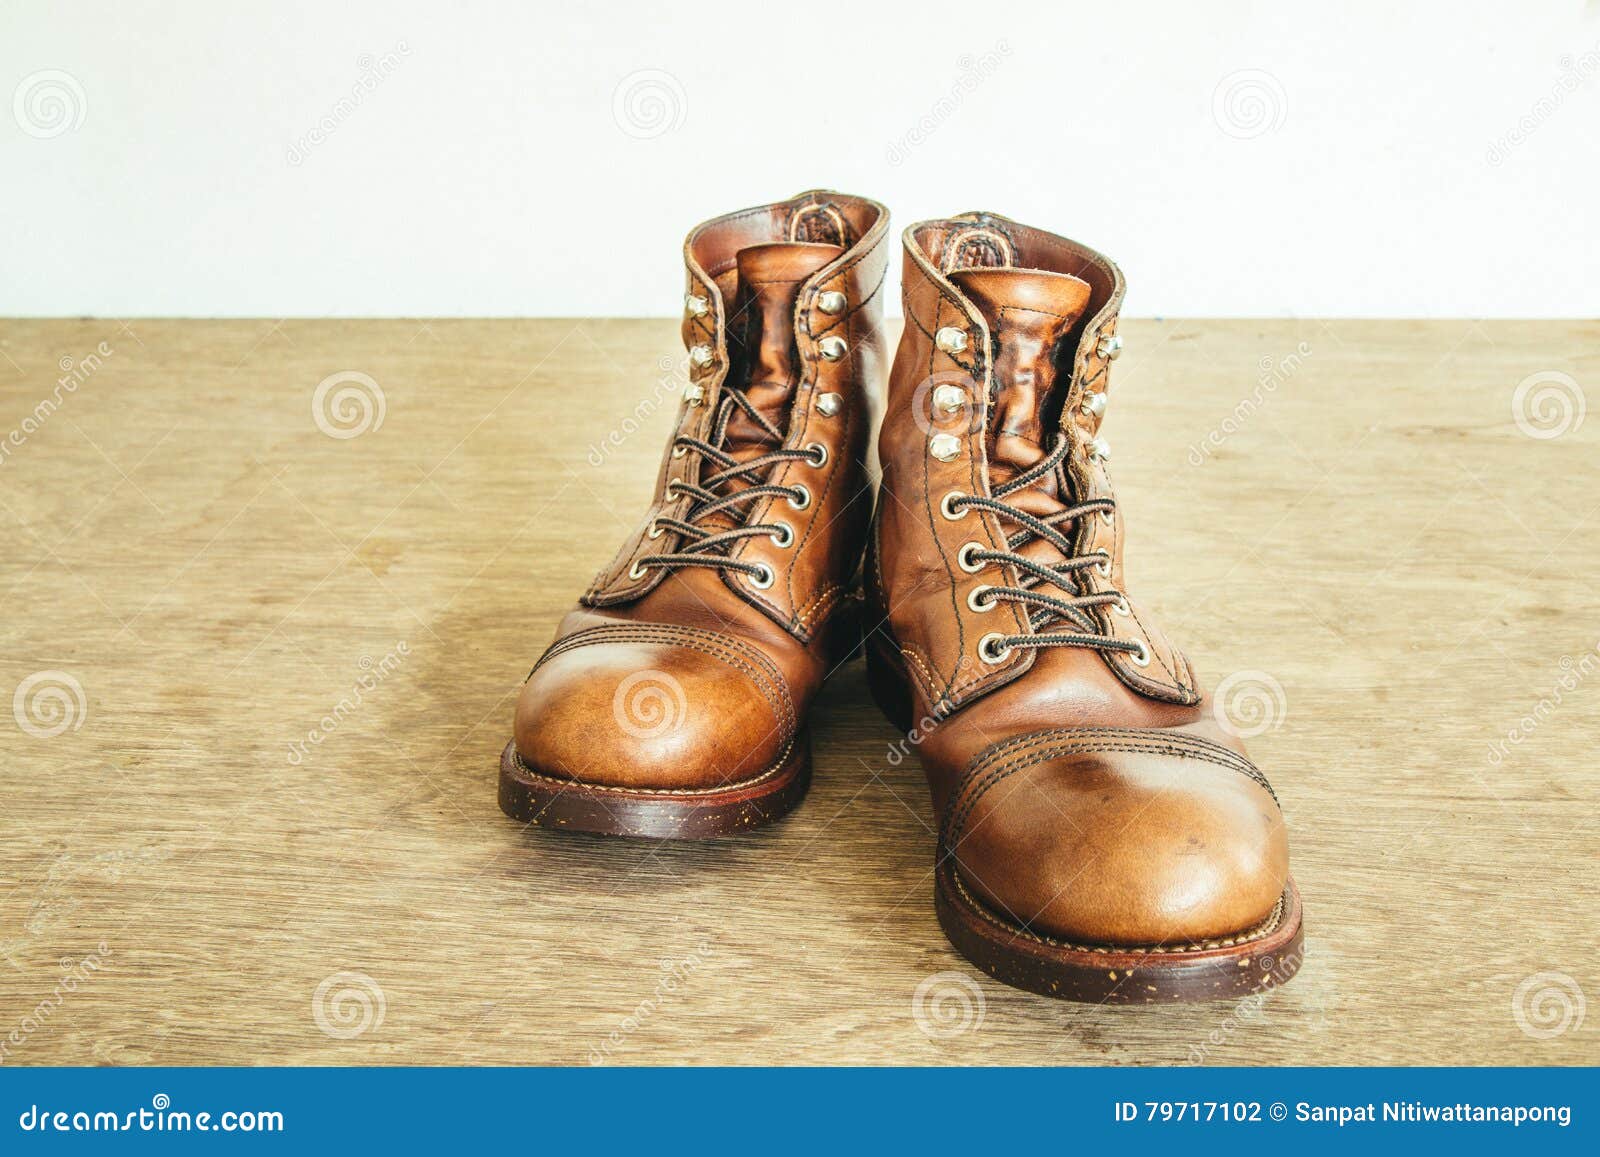 Vintage Style Picture with Safety Boots and Industrial Boots Stock ...